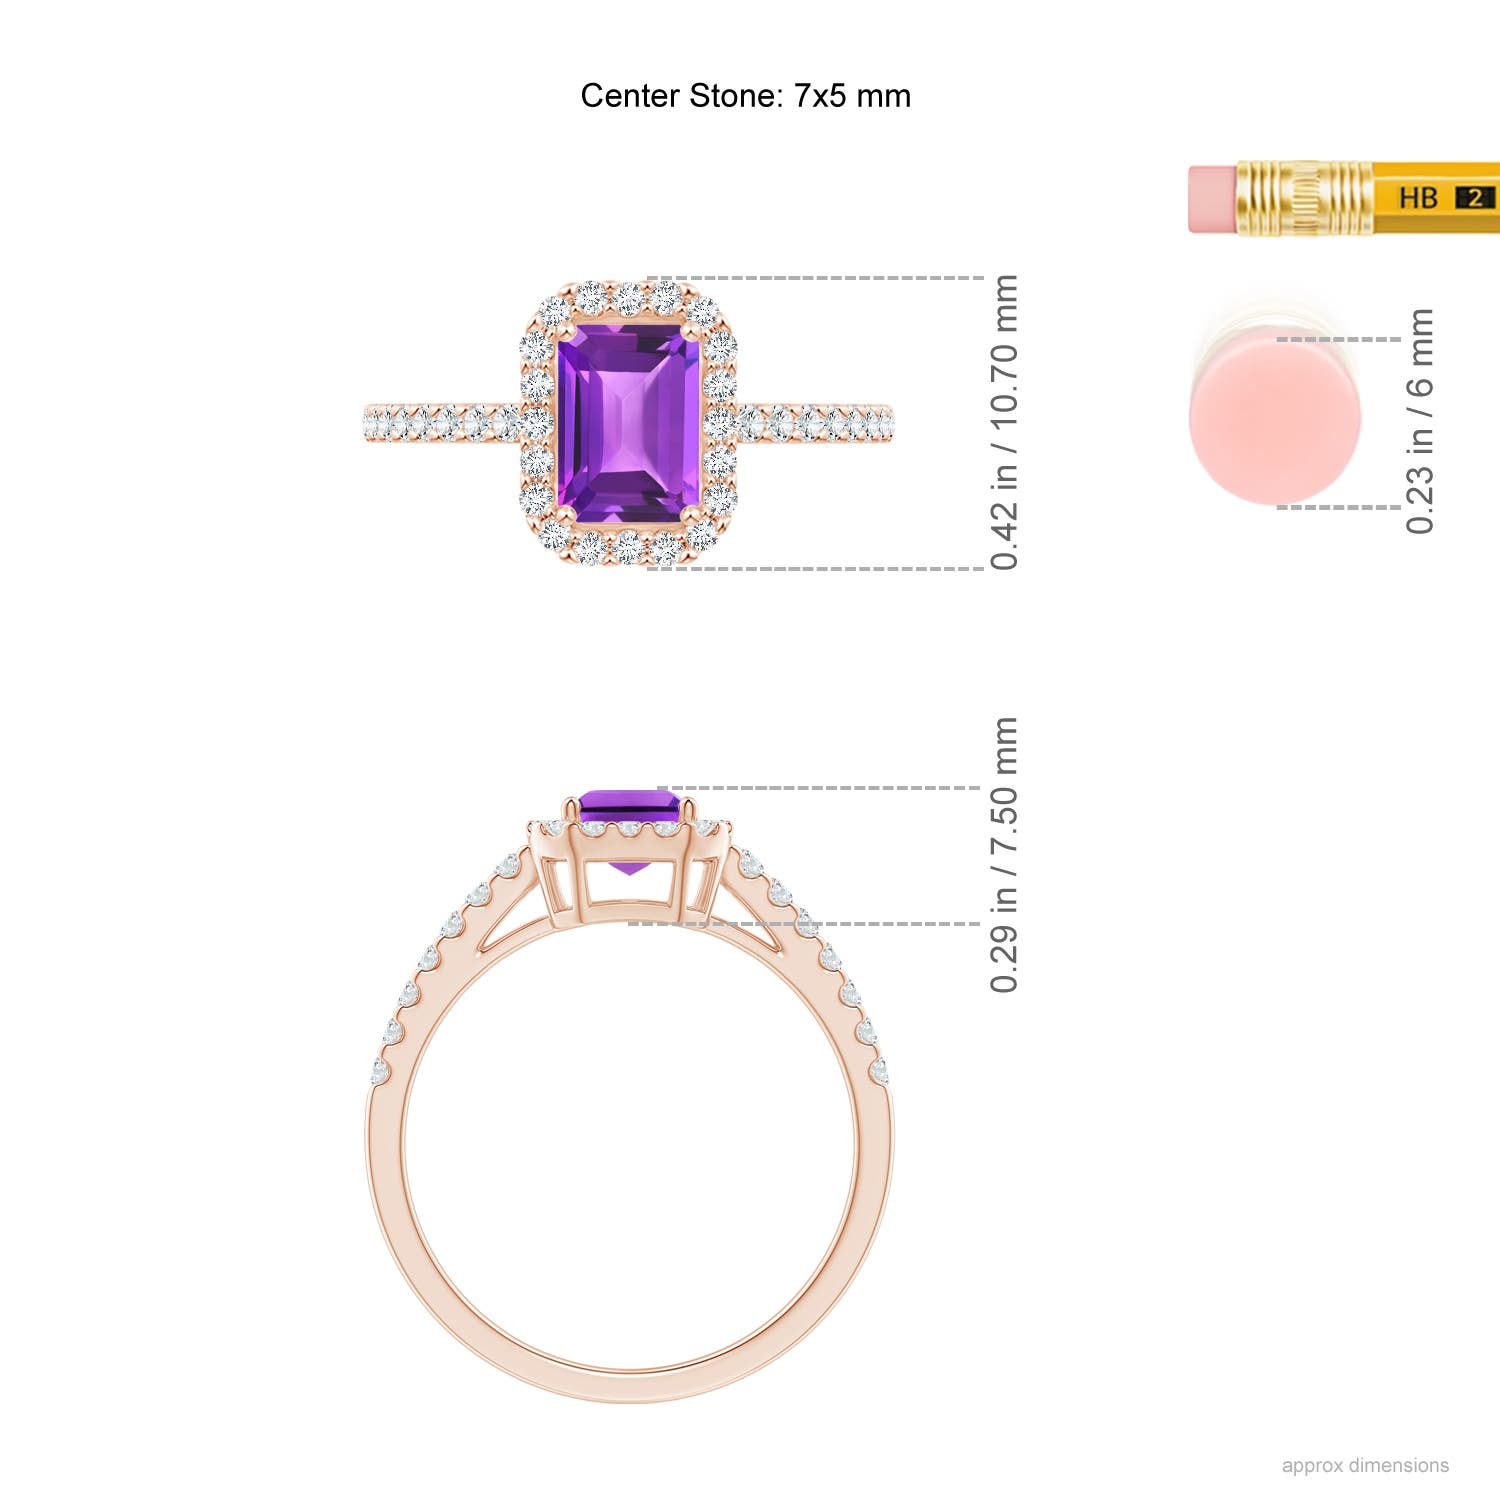 AAA - Amethyst / 1.23 CT / 14 KT Rose Gold